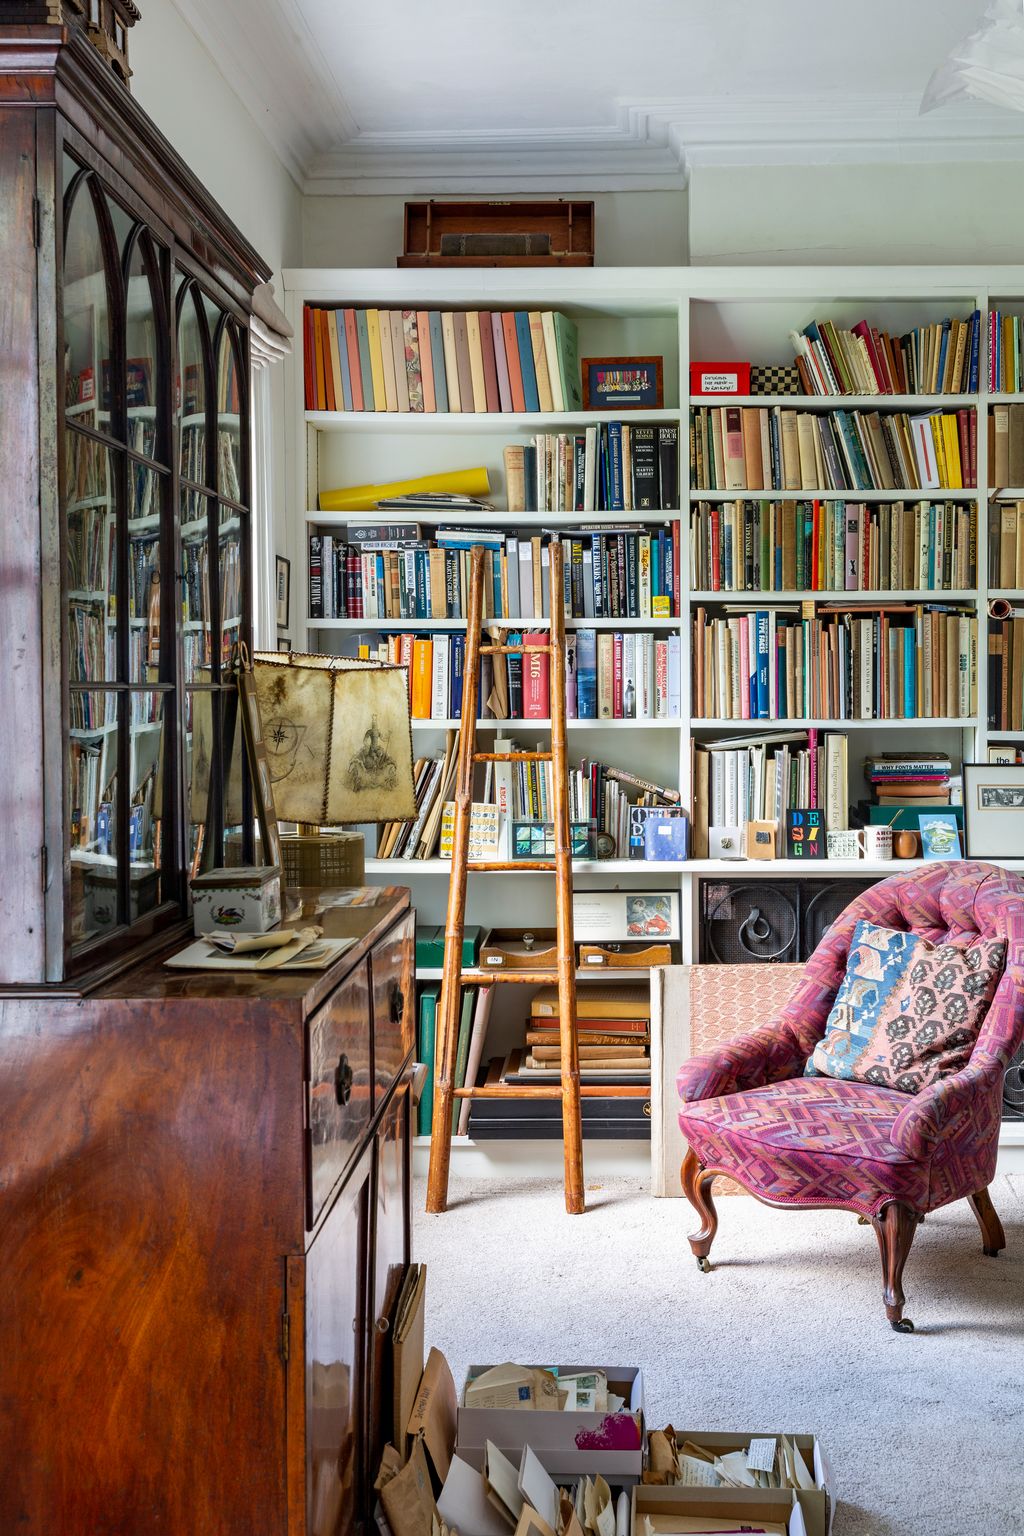 Real home: step inside this ceramicist's restored Regency townhouse ...